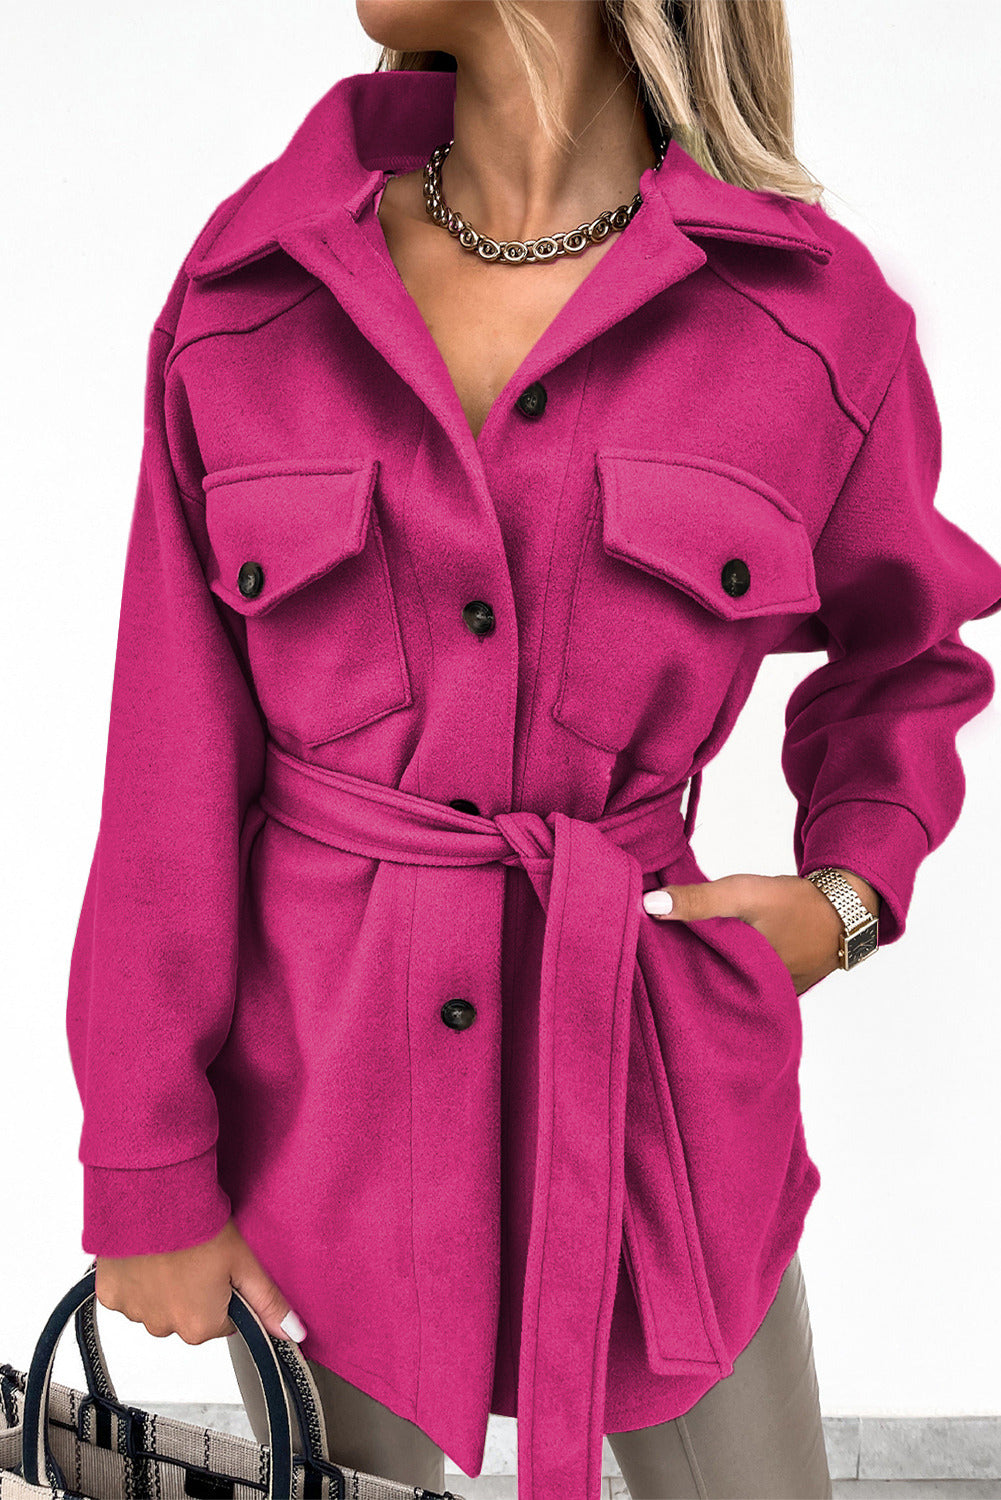 Pink Women's Lapel Button Down Coat Winter Belted Coat with Pockets LC8511359-1010